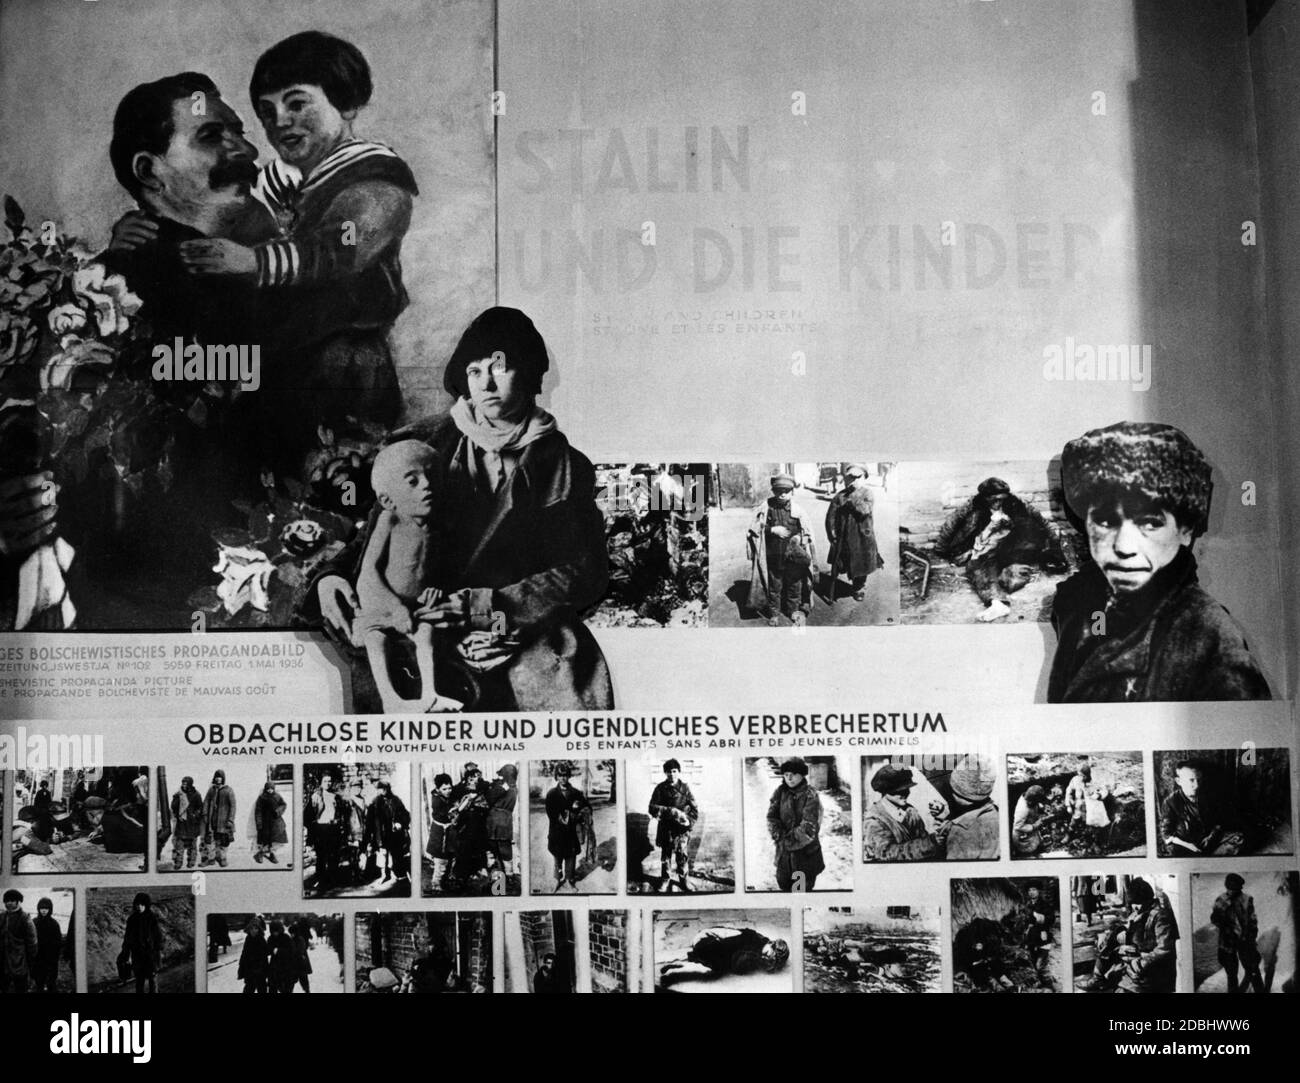 'The exhibition entitled ''Der Bolschewismus'' (Bolshevism) organized by the Comintern in Berlin. The National Socialist exhibition organizers propagandistically juxtaposed propaganda pictures showing Stalin with children and staged pictures of young homeless people.' Stock Photo